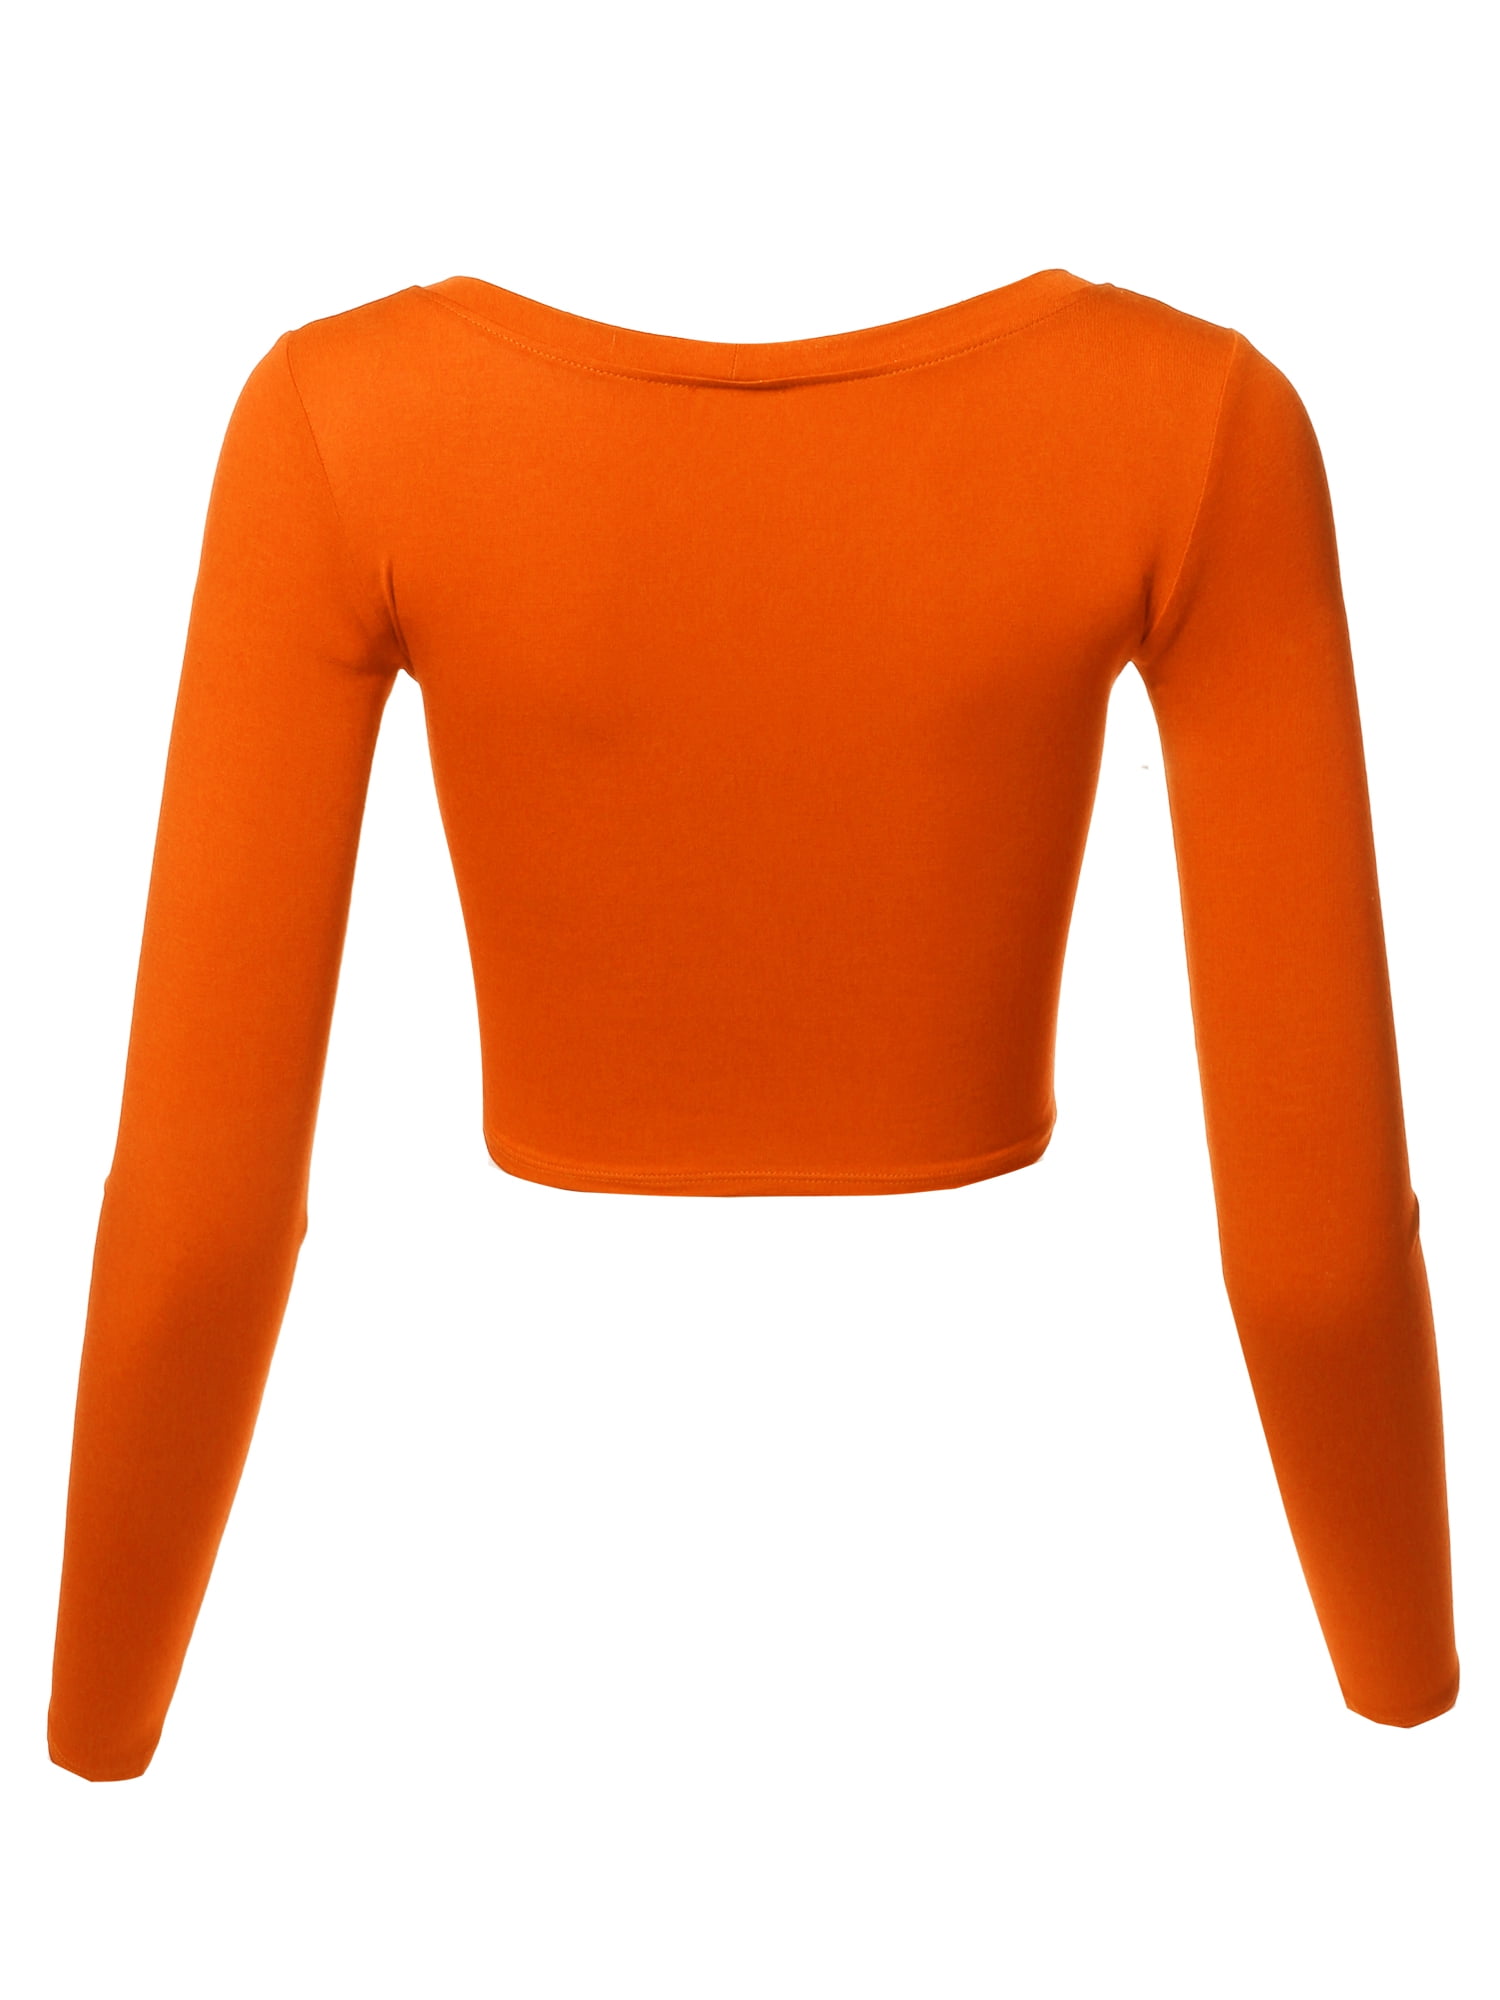 Lole Orange Red Long Sleeve Athletic Top Activewear Comfy Casual Size Small  - $25 - From Charelle